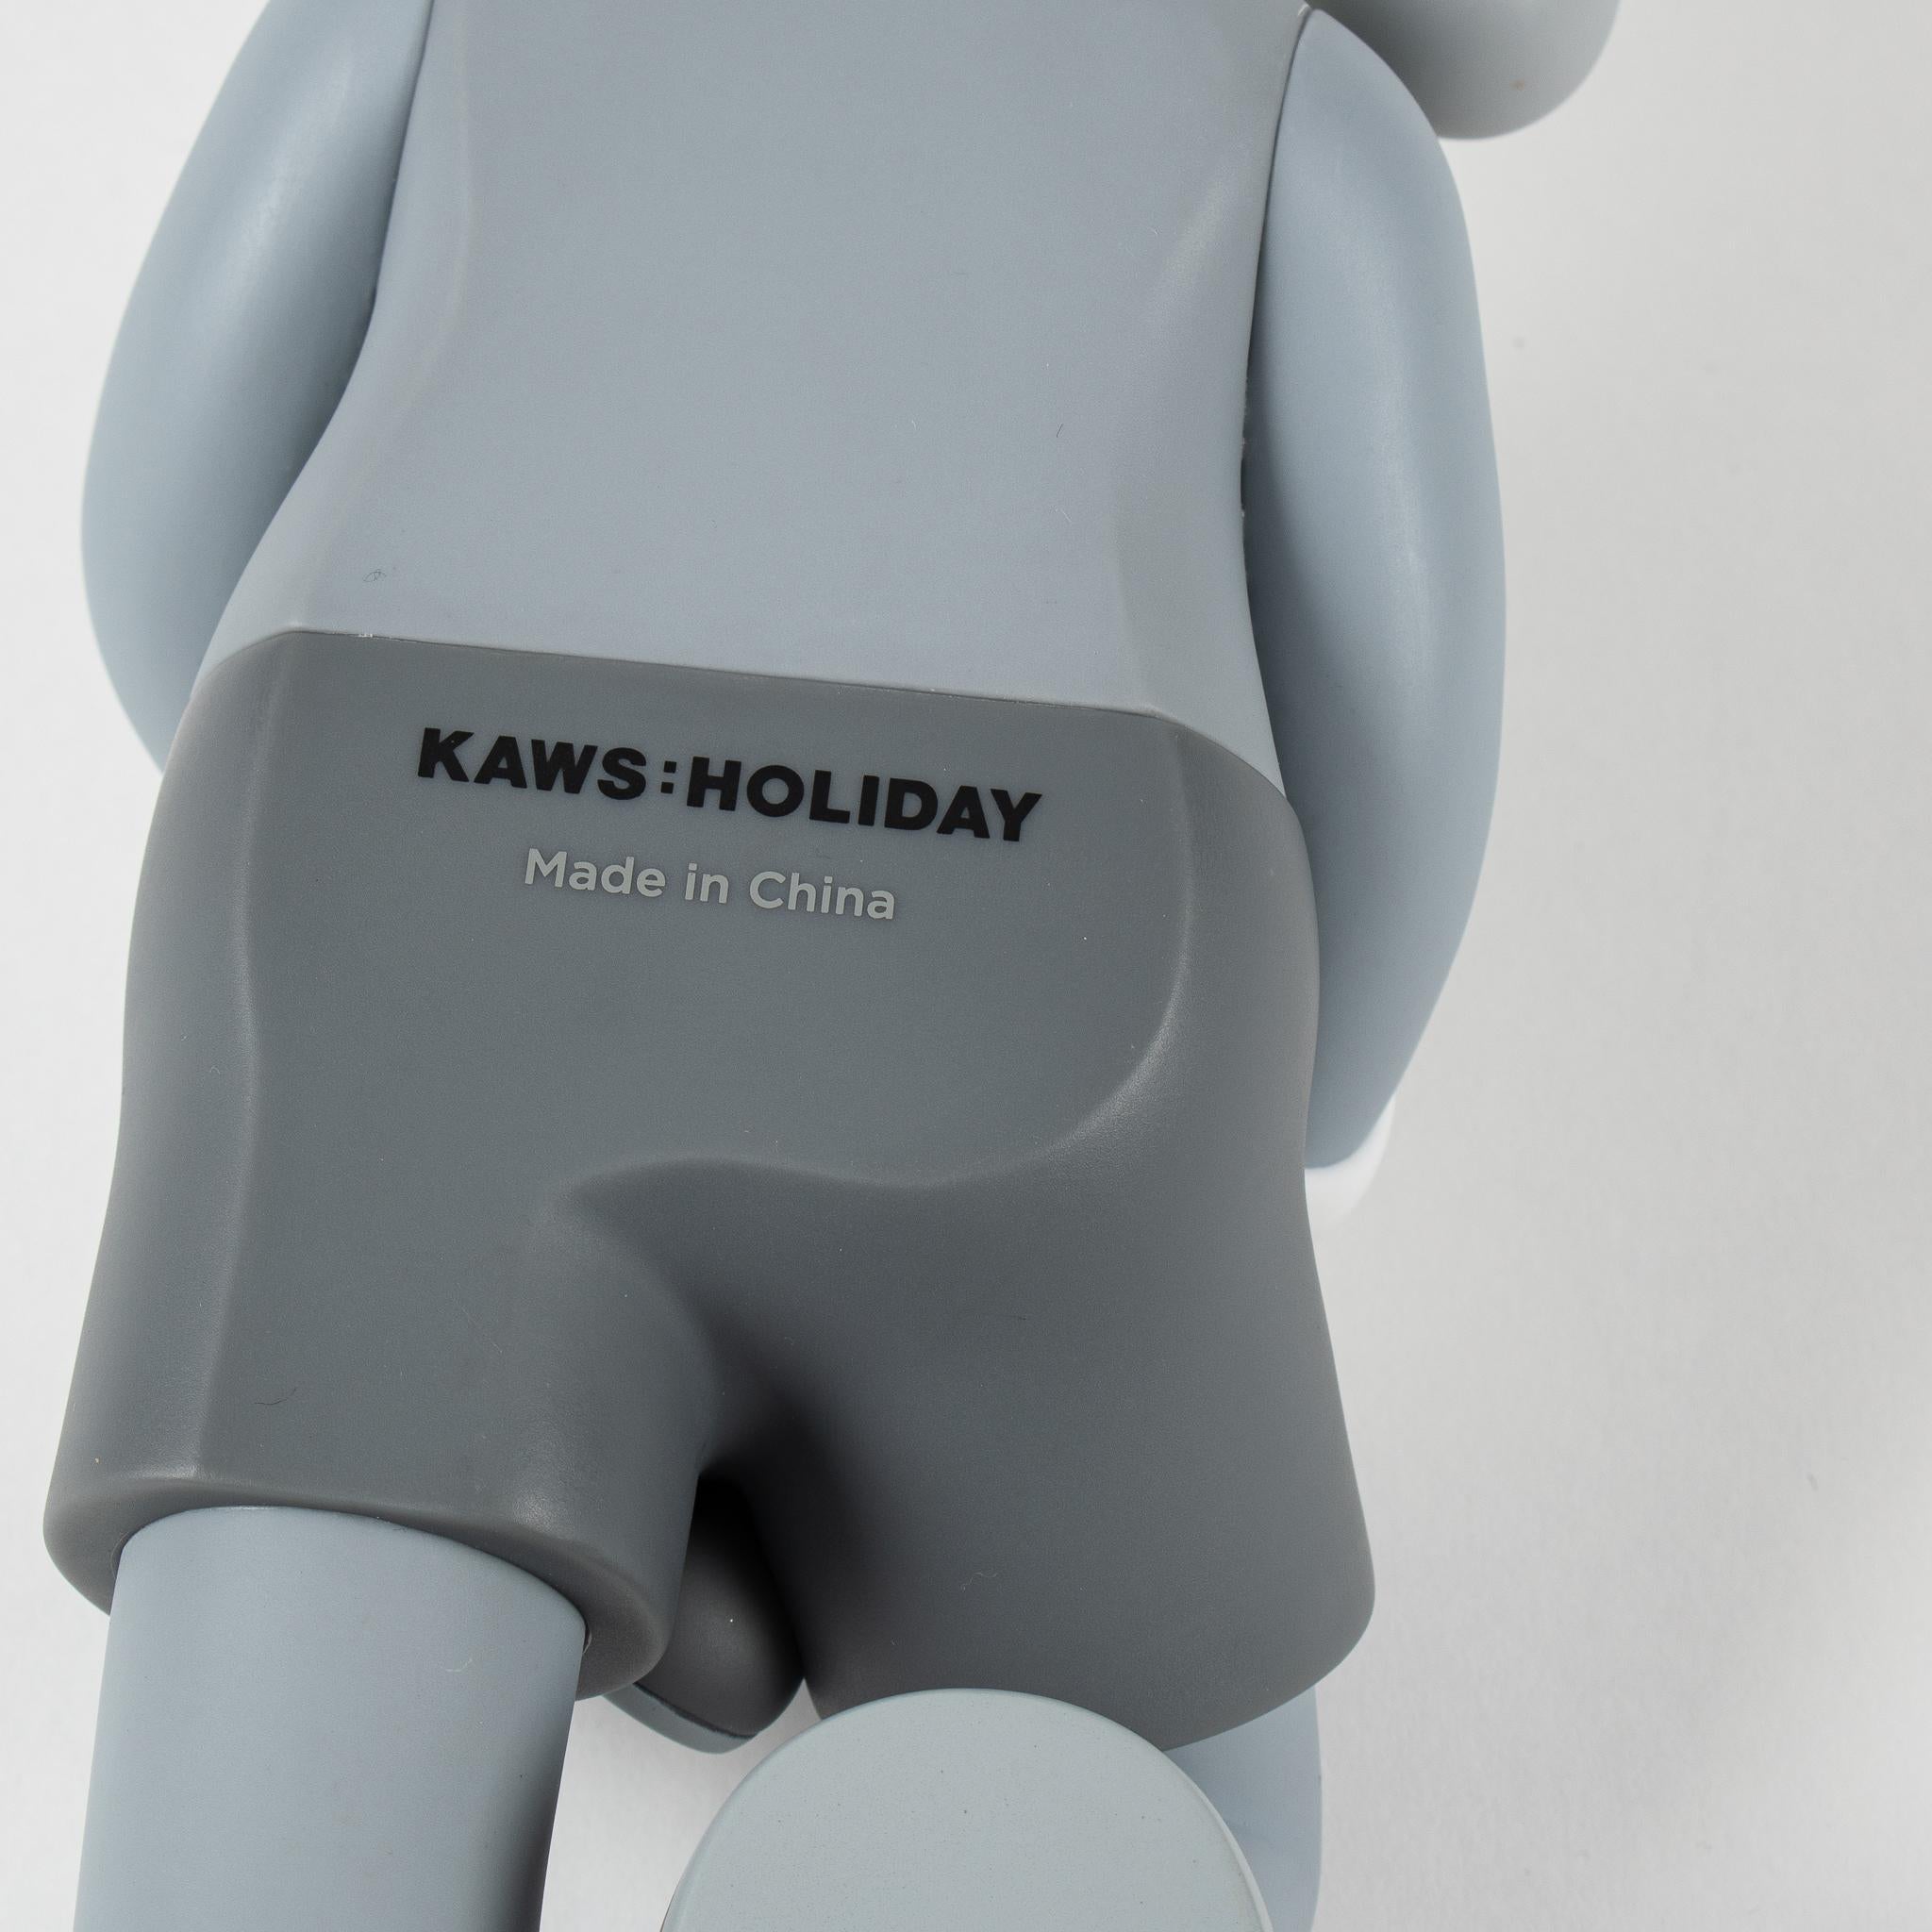 Holiday Singapore (Black, Grey and Brown) - Contemporary Sculpture by KAWS